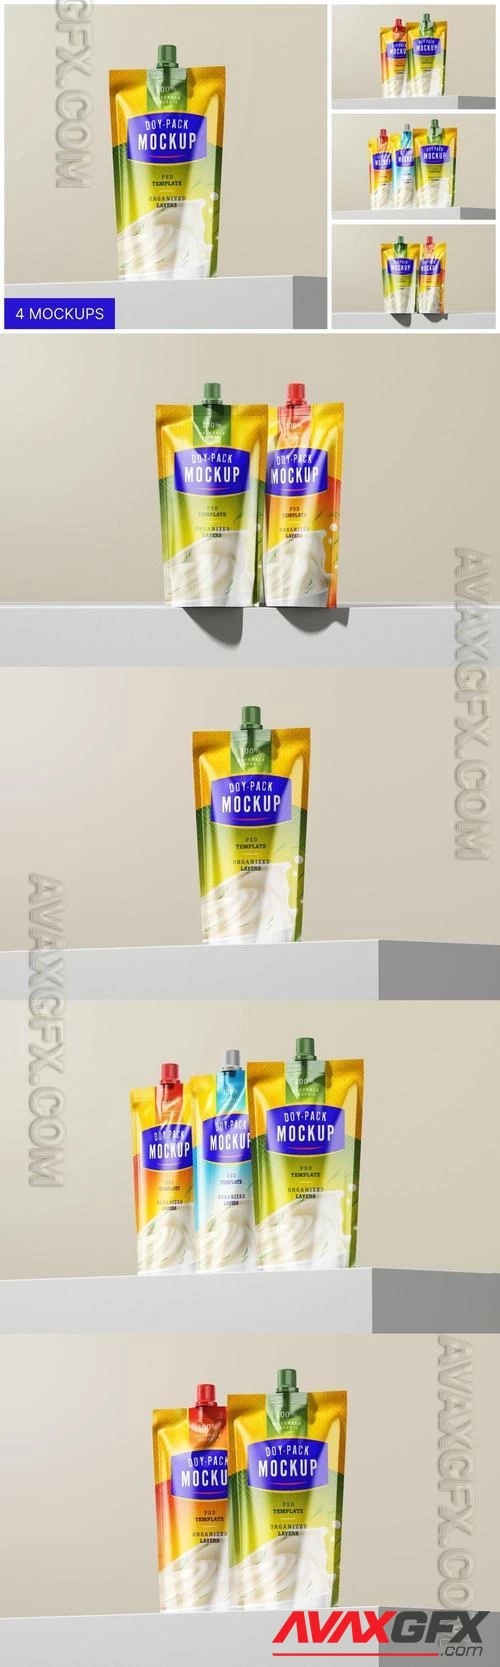 Doypack Standing Pouch Packaging Mockup Set